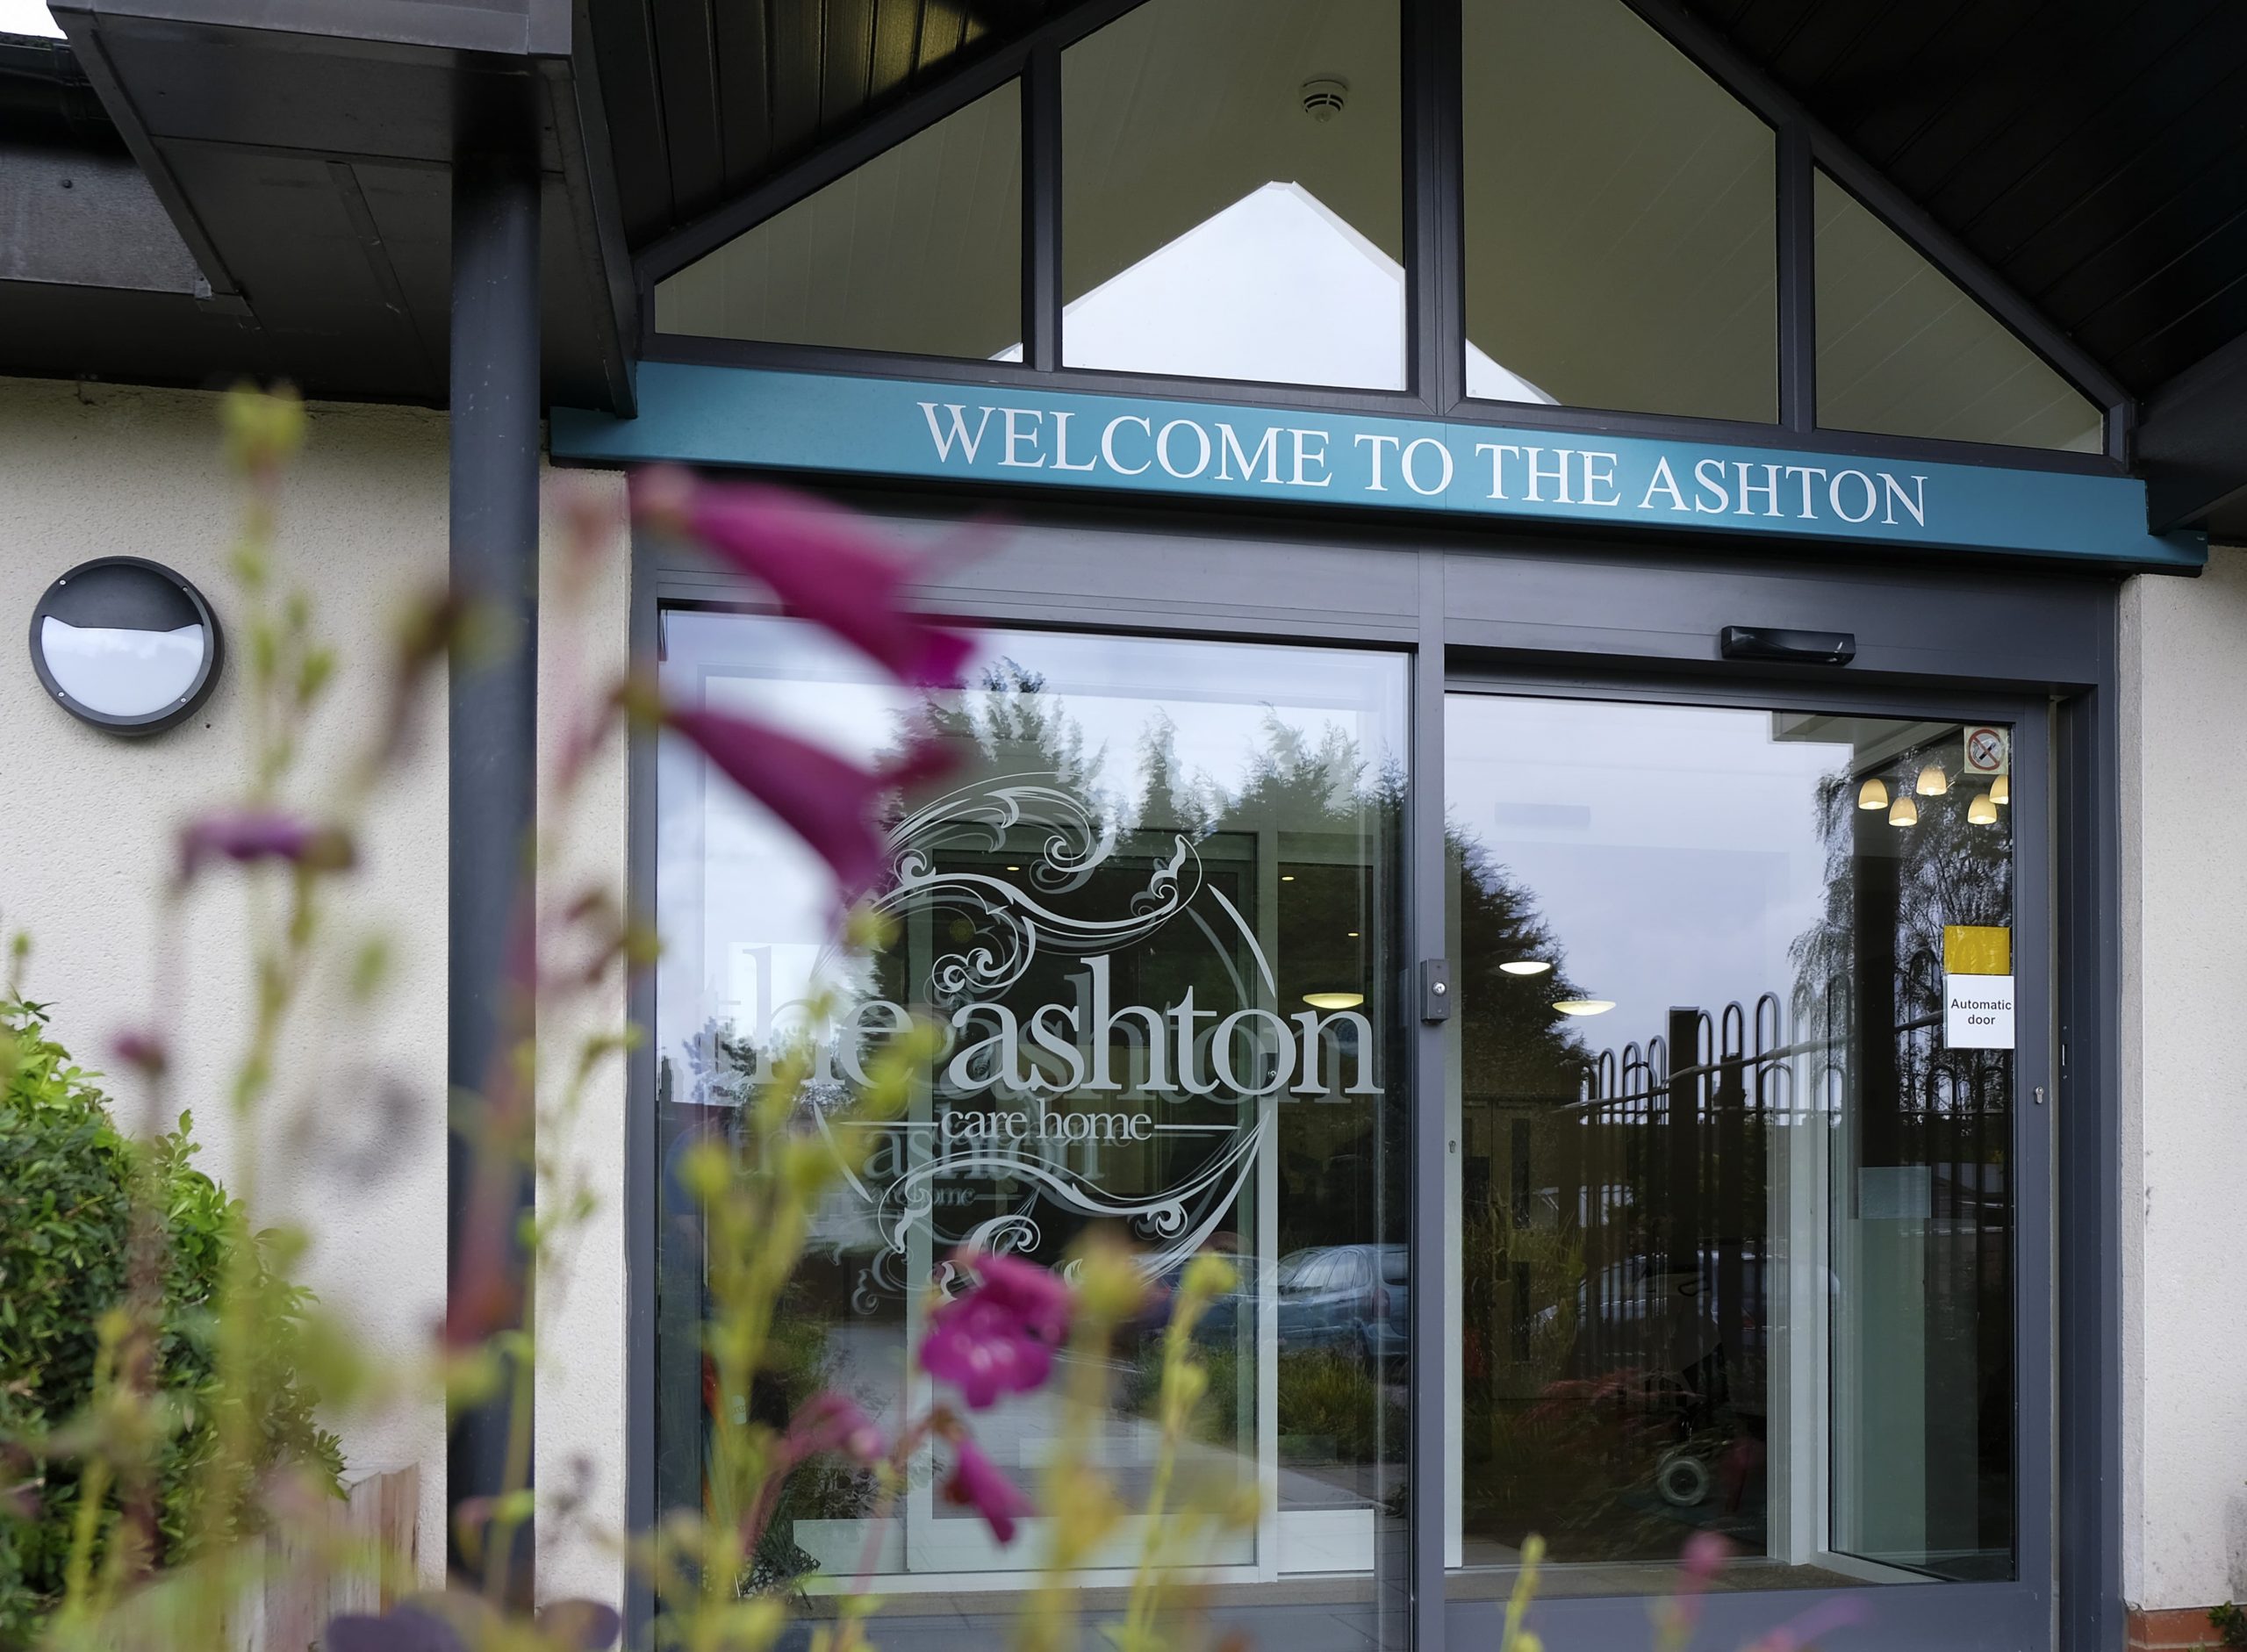 The entrance of our care home, The Ashton.